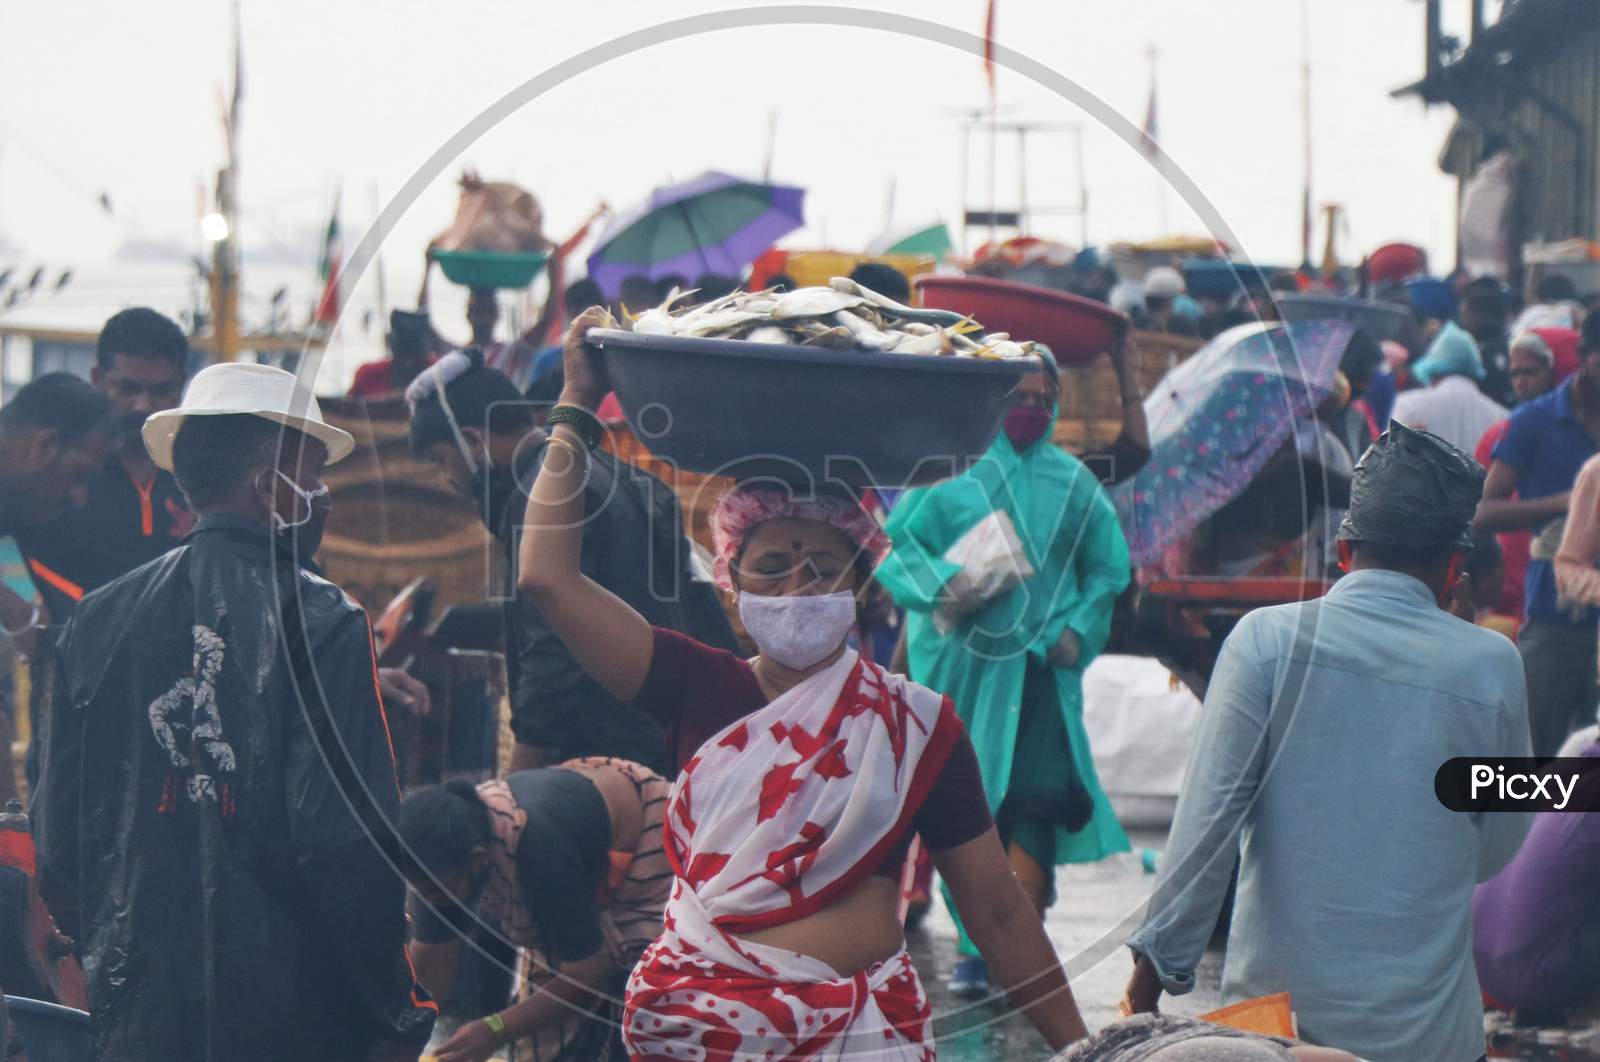 A fisherwoman wearing a protective mask is seen at a fish market amidst the spread of the coronavirus disease (COVID-19) in Mumbai, India on September 7, 2020.